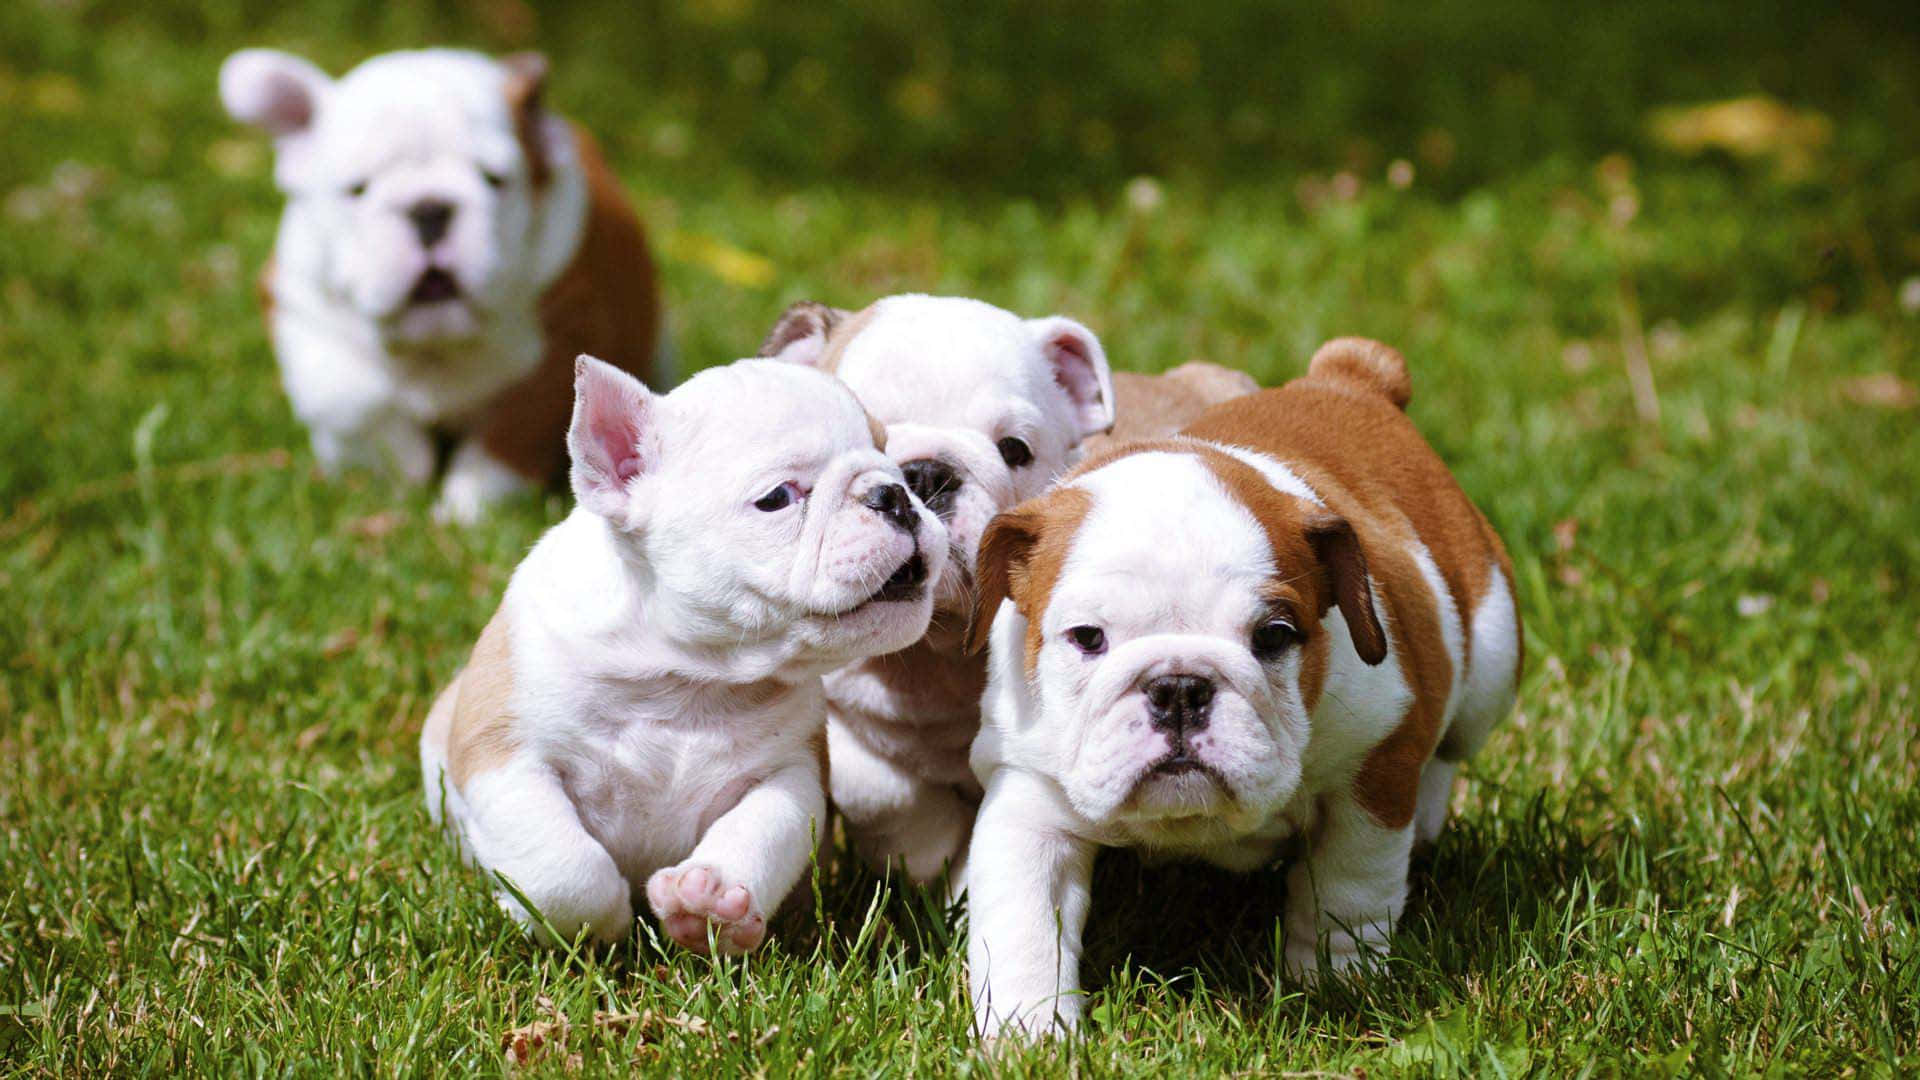 Adorable Running Puppy Bulldog Picture